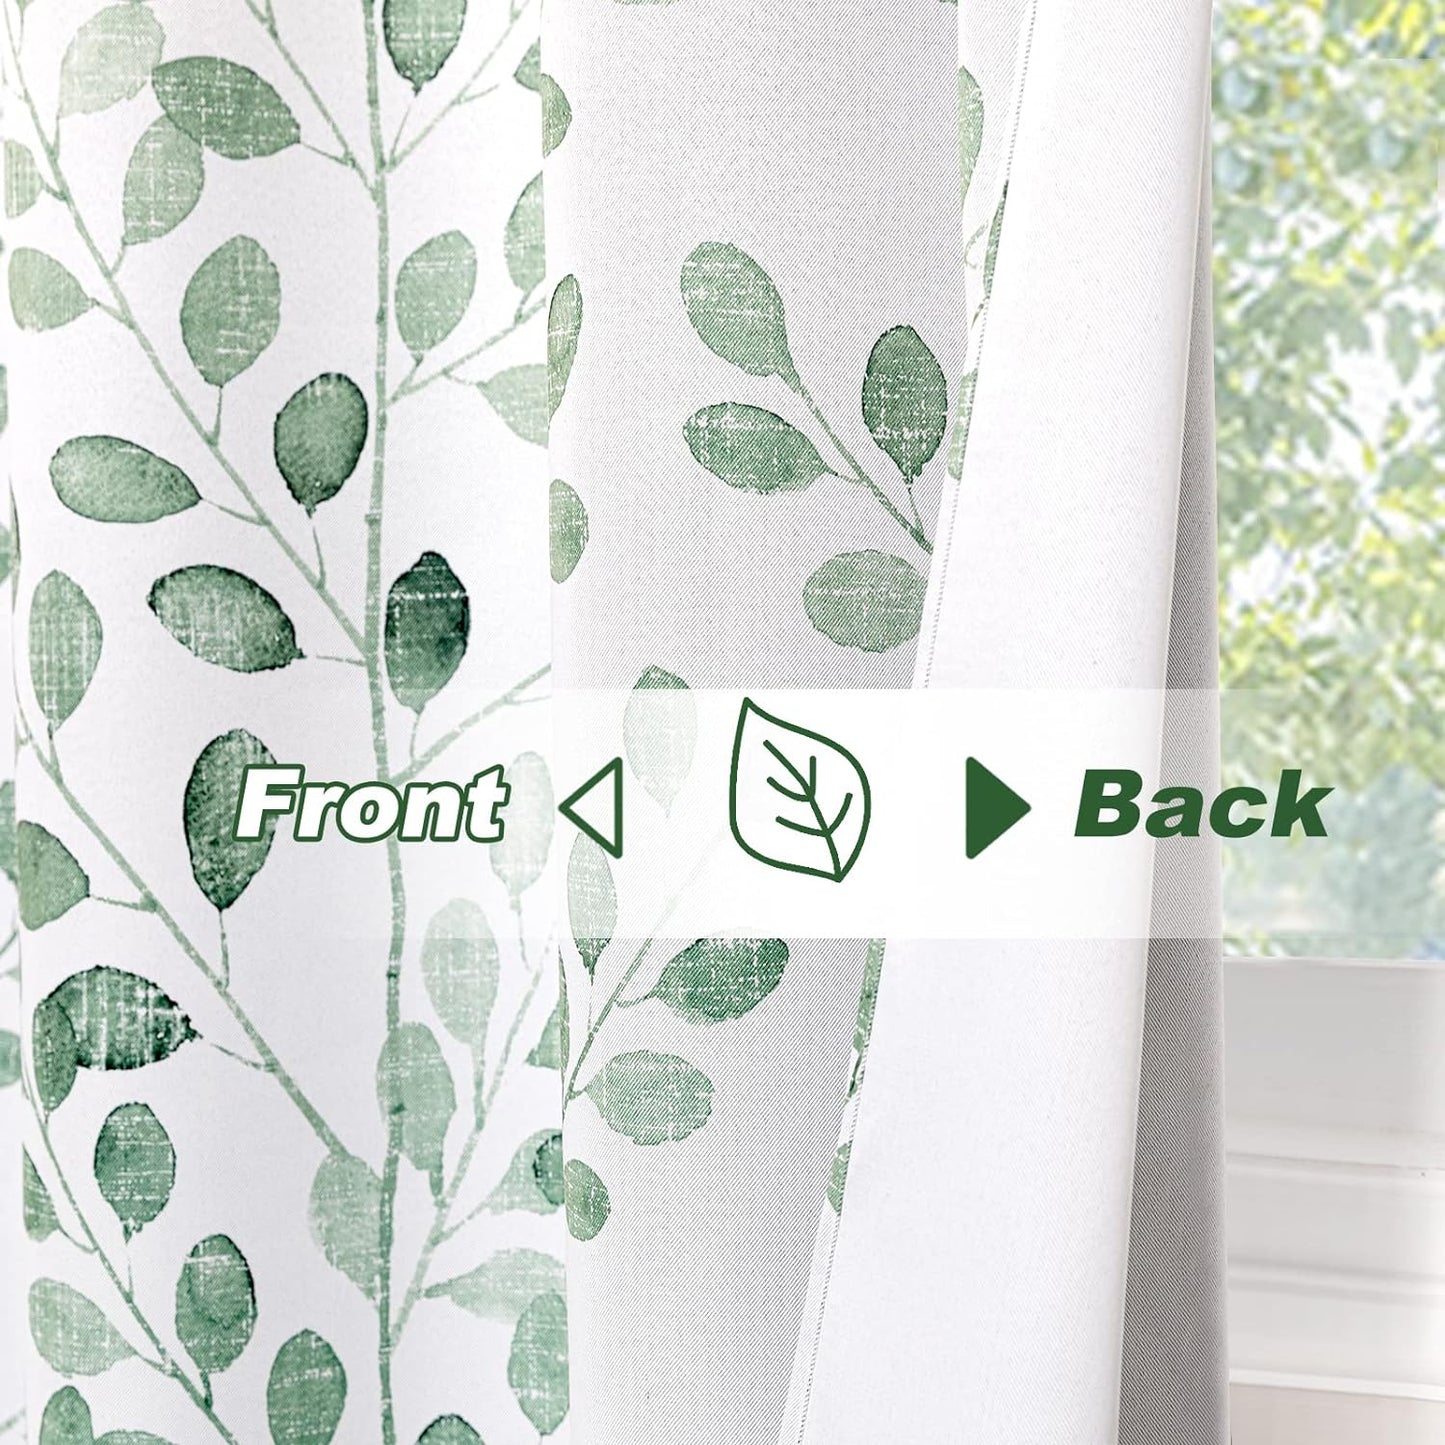 MYSKY HOME Curtains for Bedroom 63 Inches Long Thermal Insulated Room Darkening Curtains Tree Branch Print Pattern Classic Curtains for Dining Room Home Decor Grommet Top Drapes, Sage, 2 Pieces  MYSKY HOME   